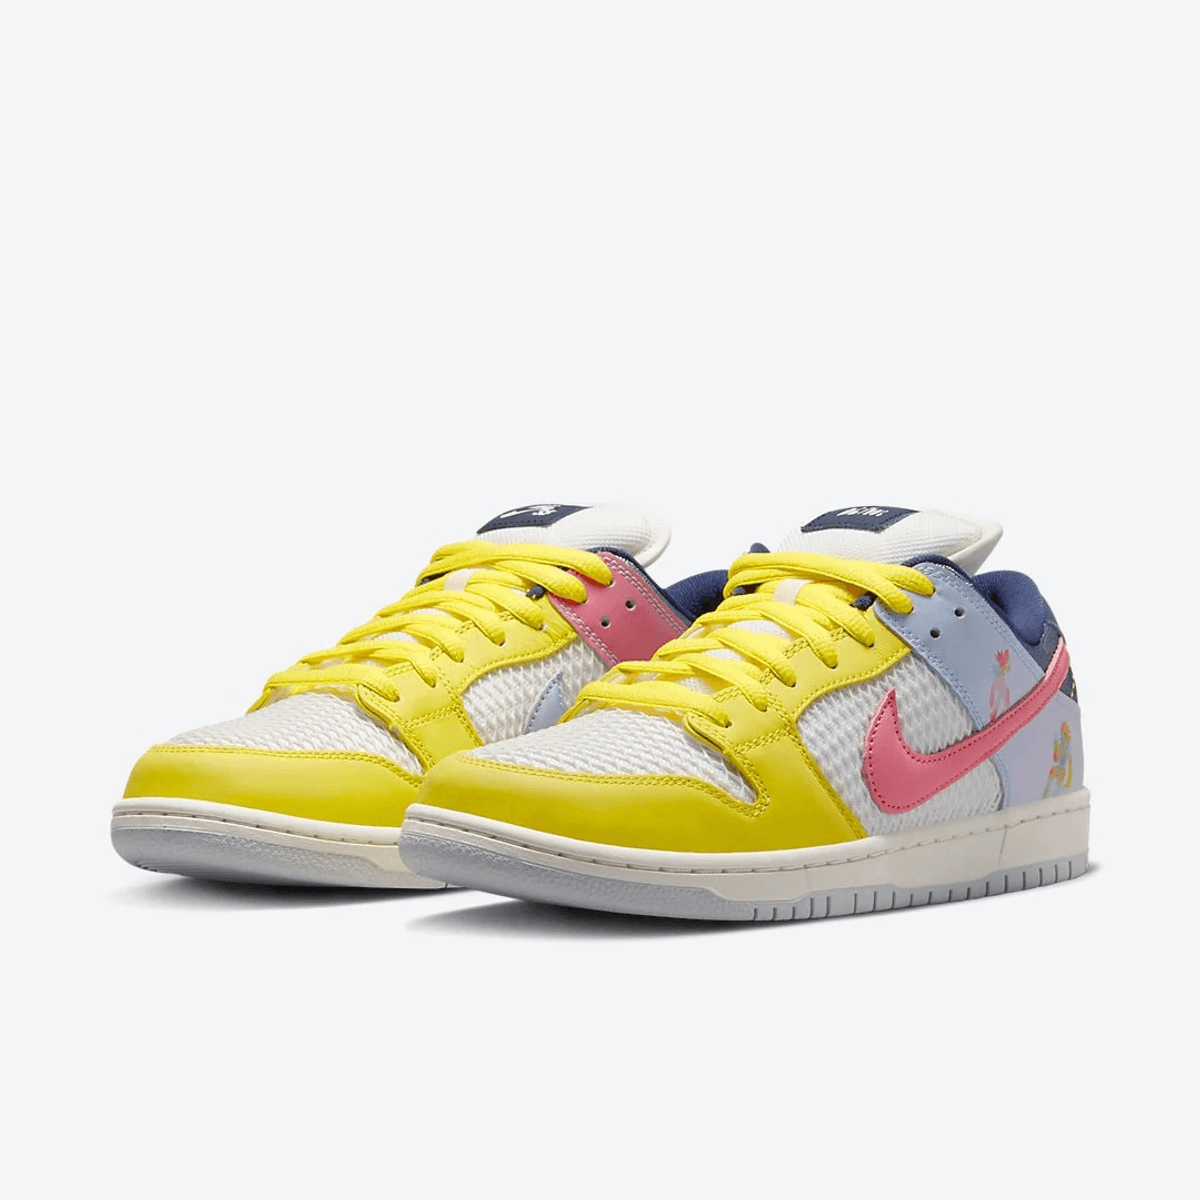 Reveal What It Means To Be You With The Nike SB Dunk Low Be True